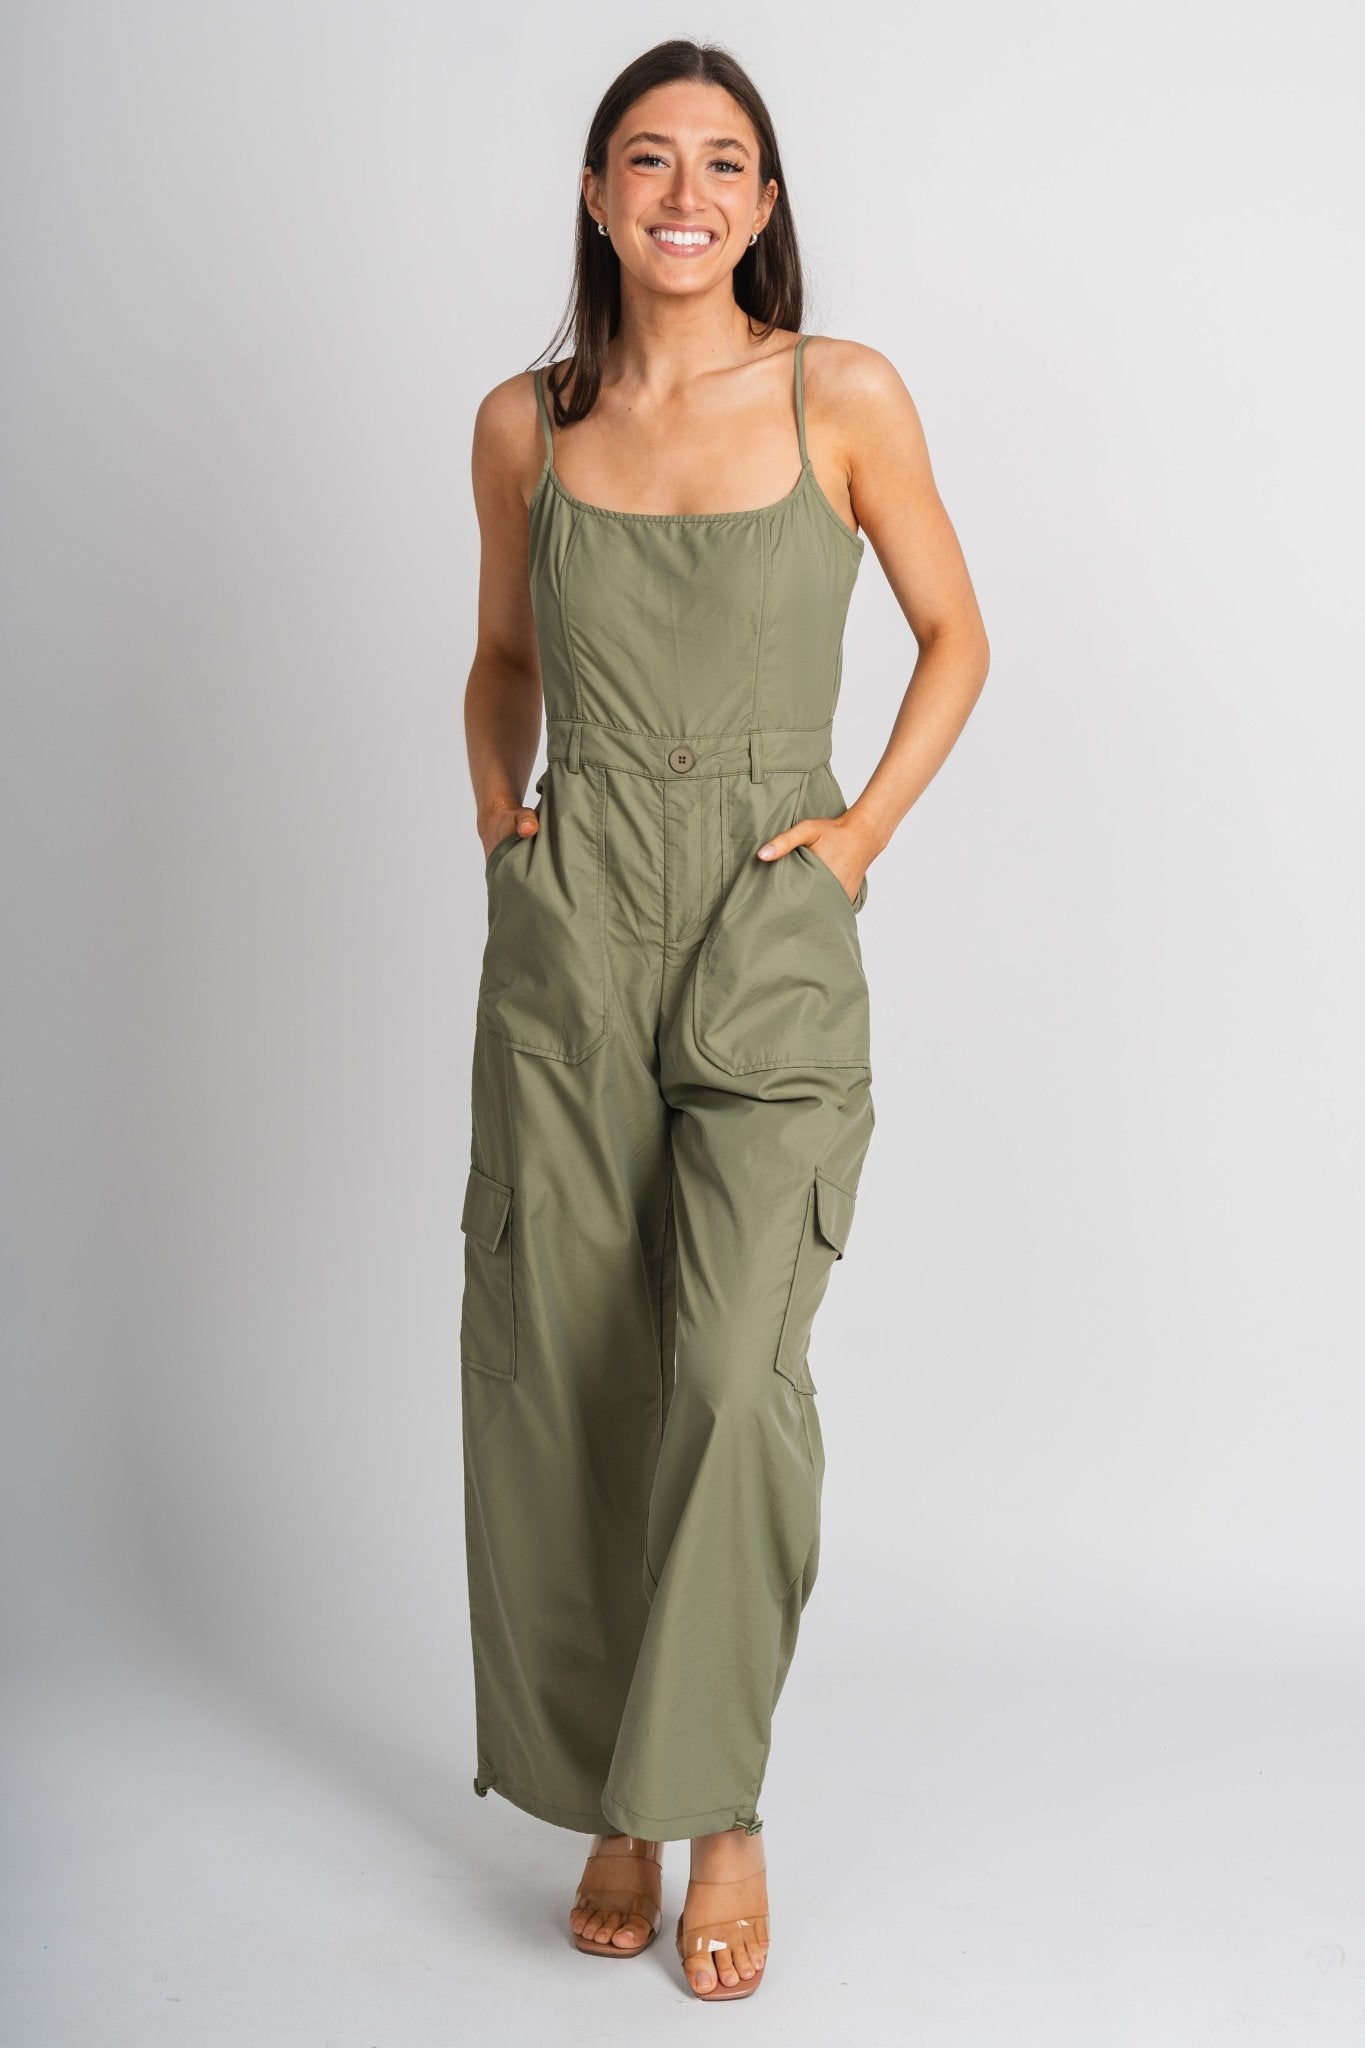 Cargo jumpsuit light olive Stylish jumpsuit - Womens Fashion Rompers & Pantsuits at Lush Fashion Lounge Boutique in Oklahoma City